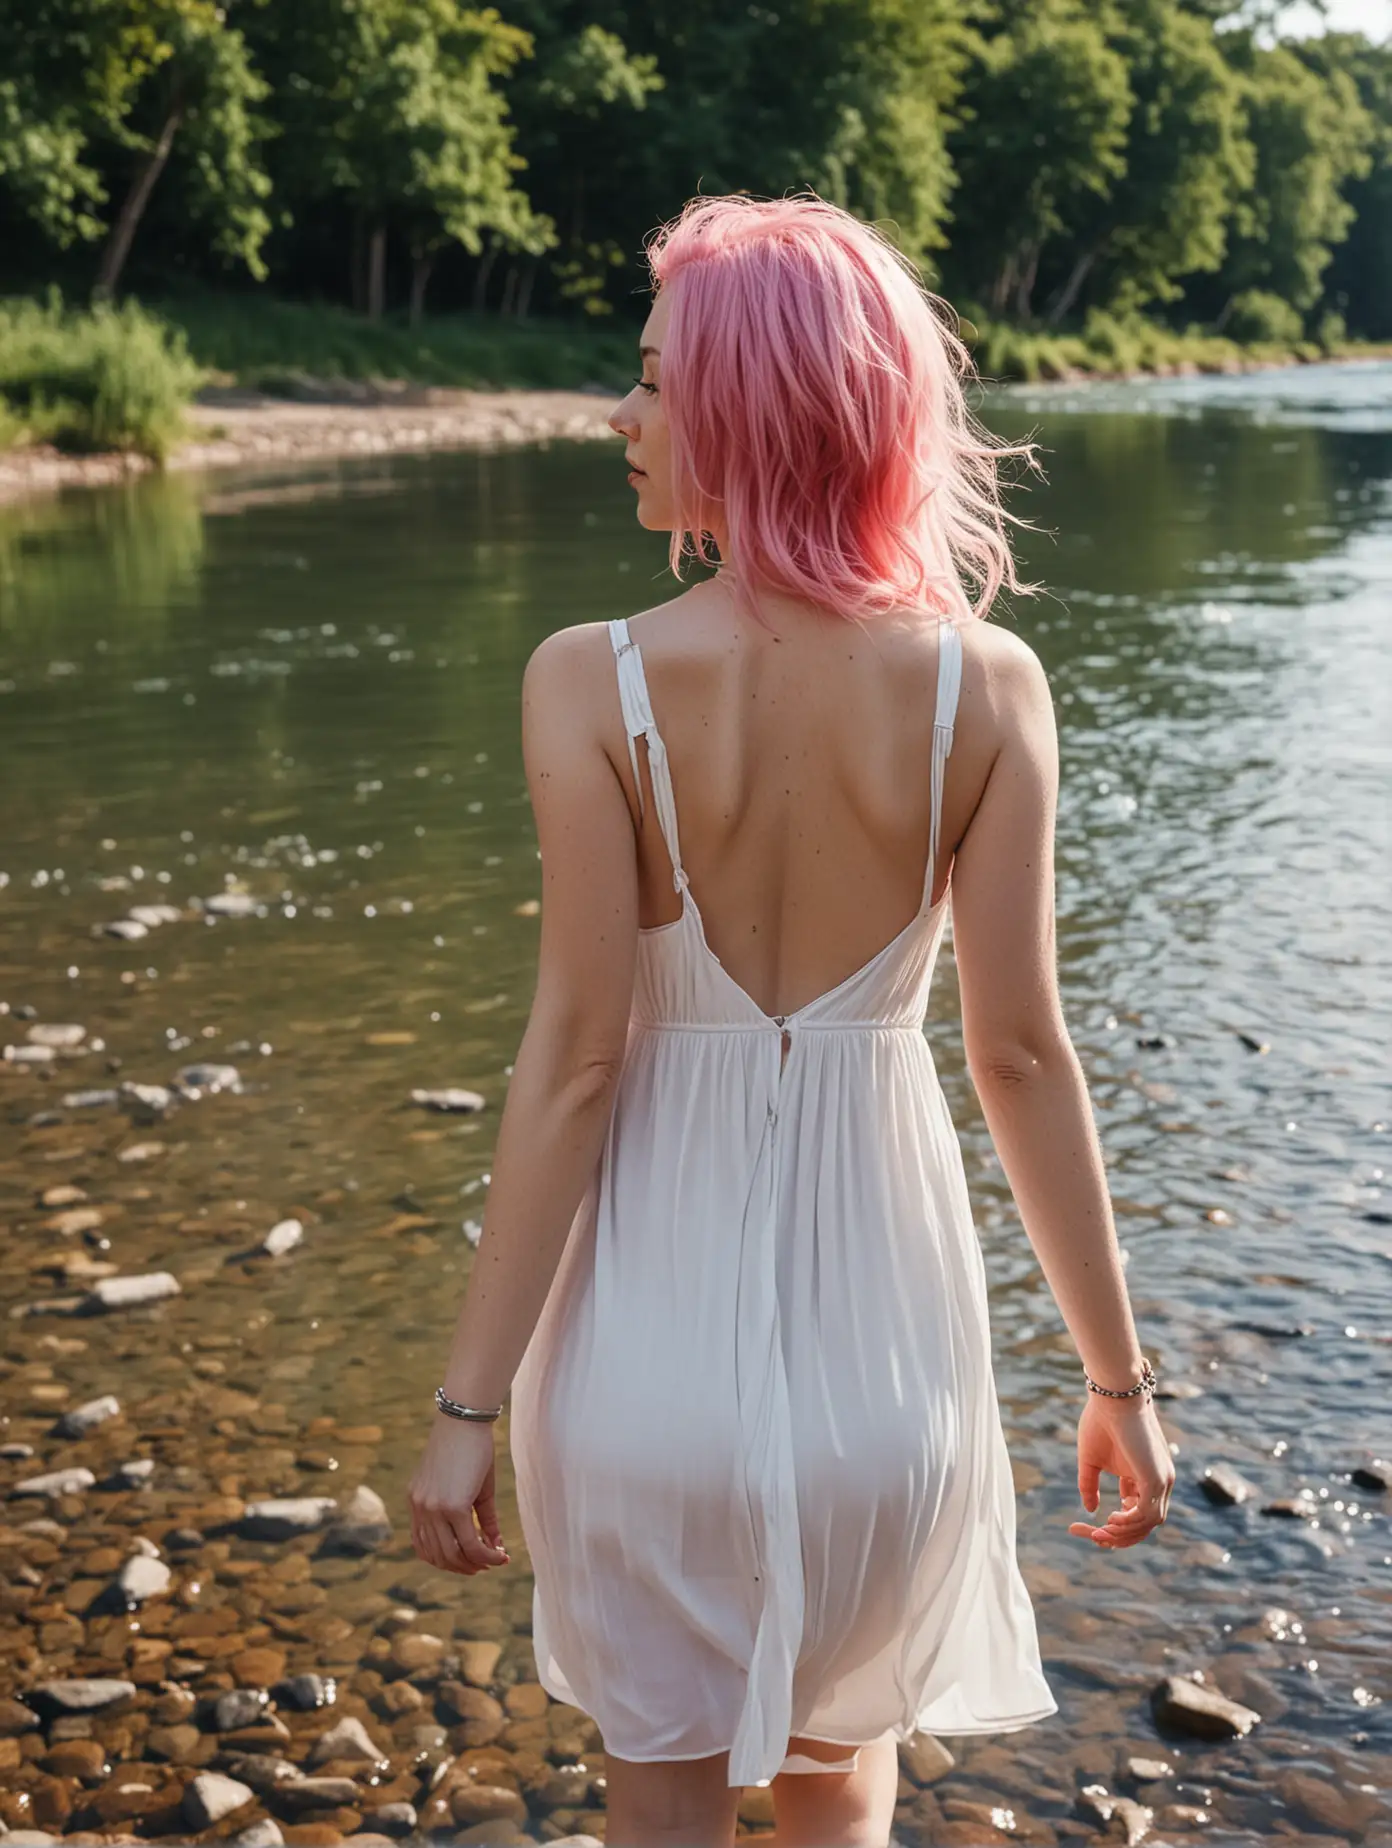 Woman-with-Pink-Hair-Walking-by-the-River-in-a-White-Dress